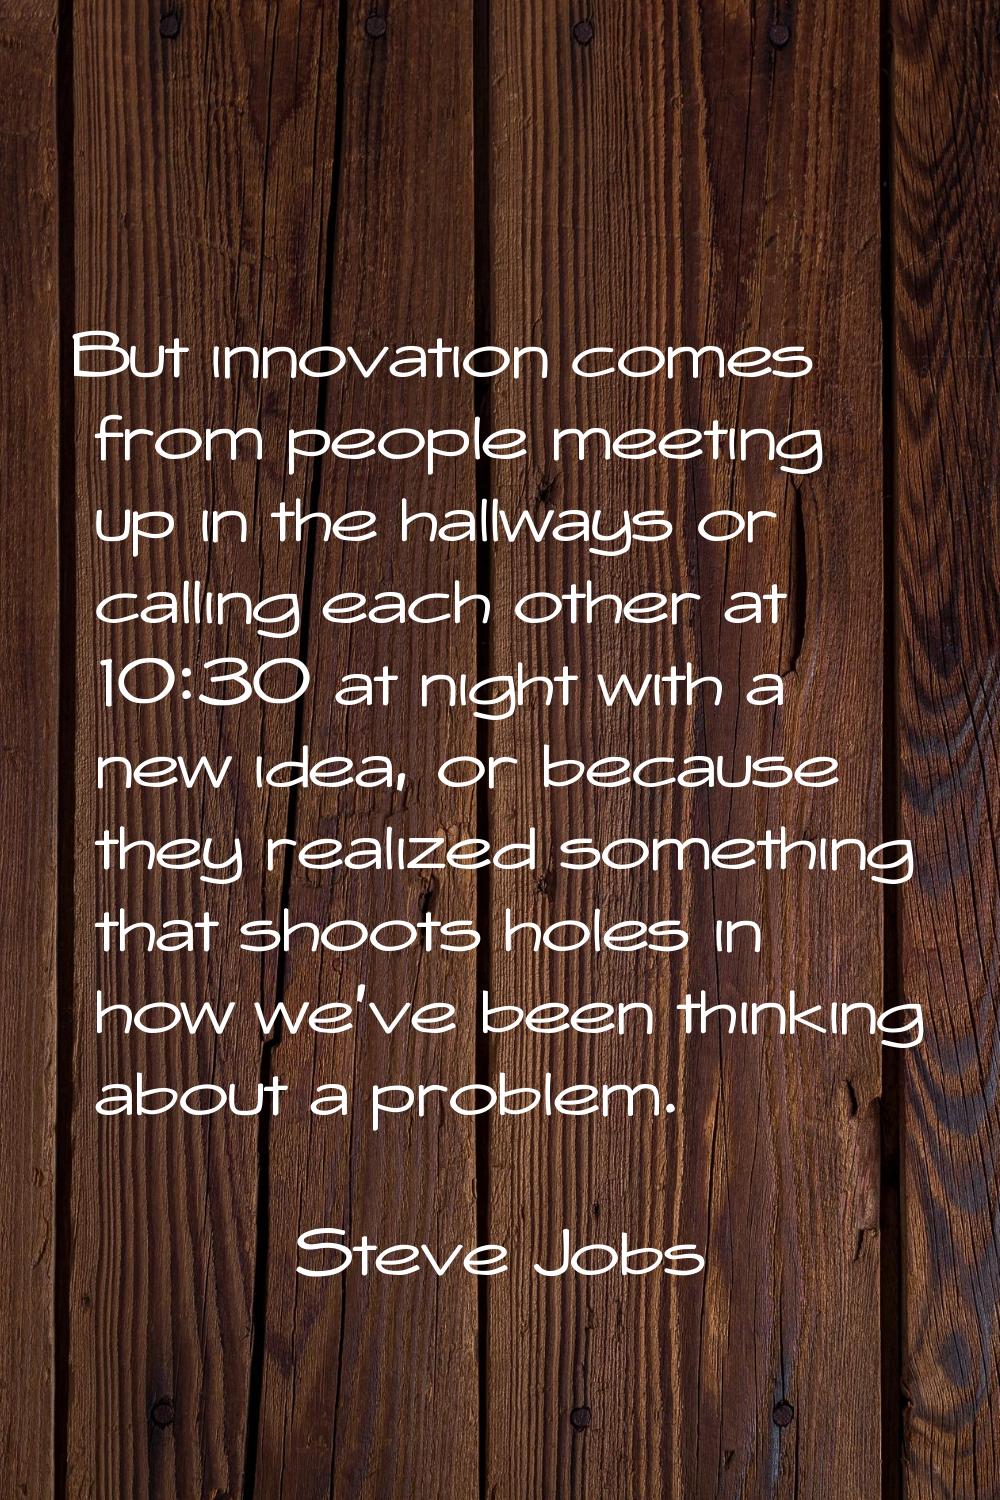 But innovation comes from people meeting up in the hallways or calling each other at 10:30 at night